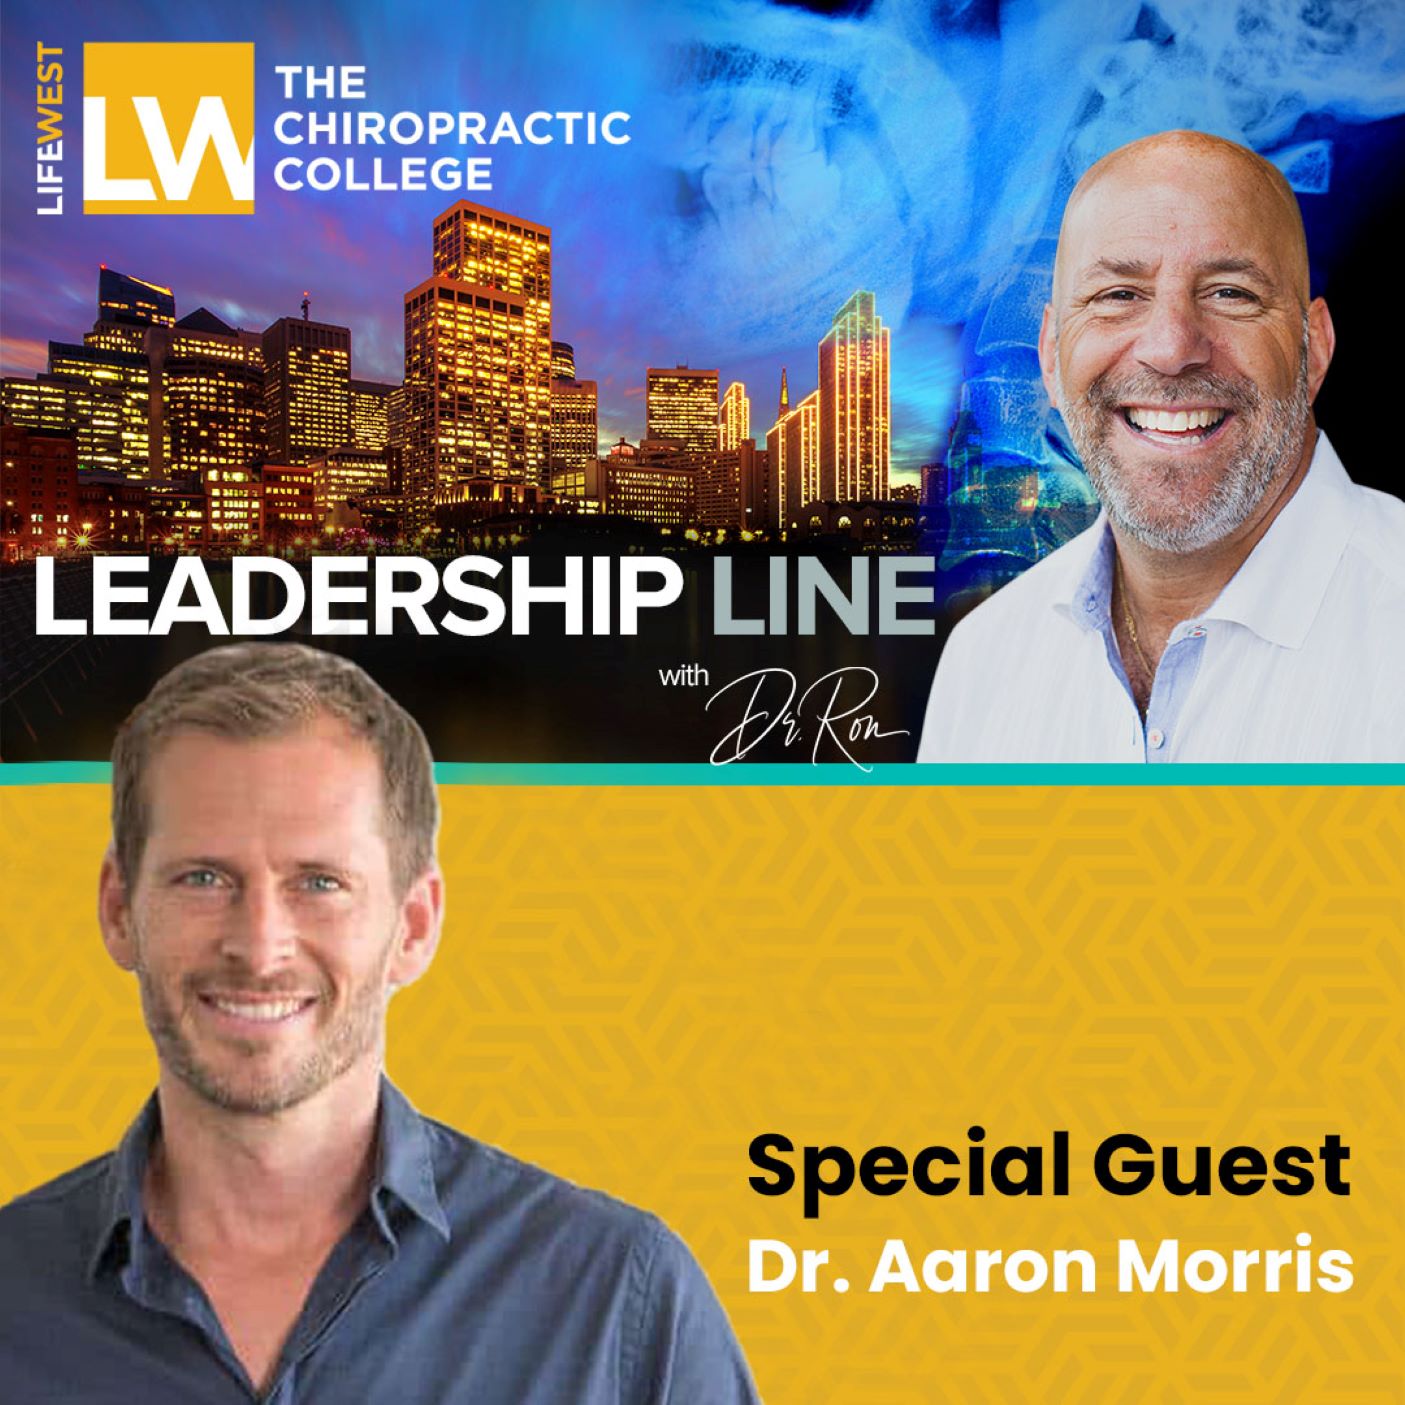 S2 Ep28 A Crisis That Ended Up Healing Me with Dr. Aaron Morris